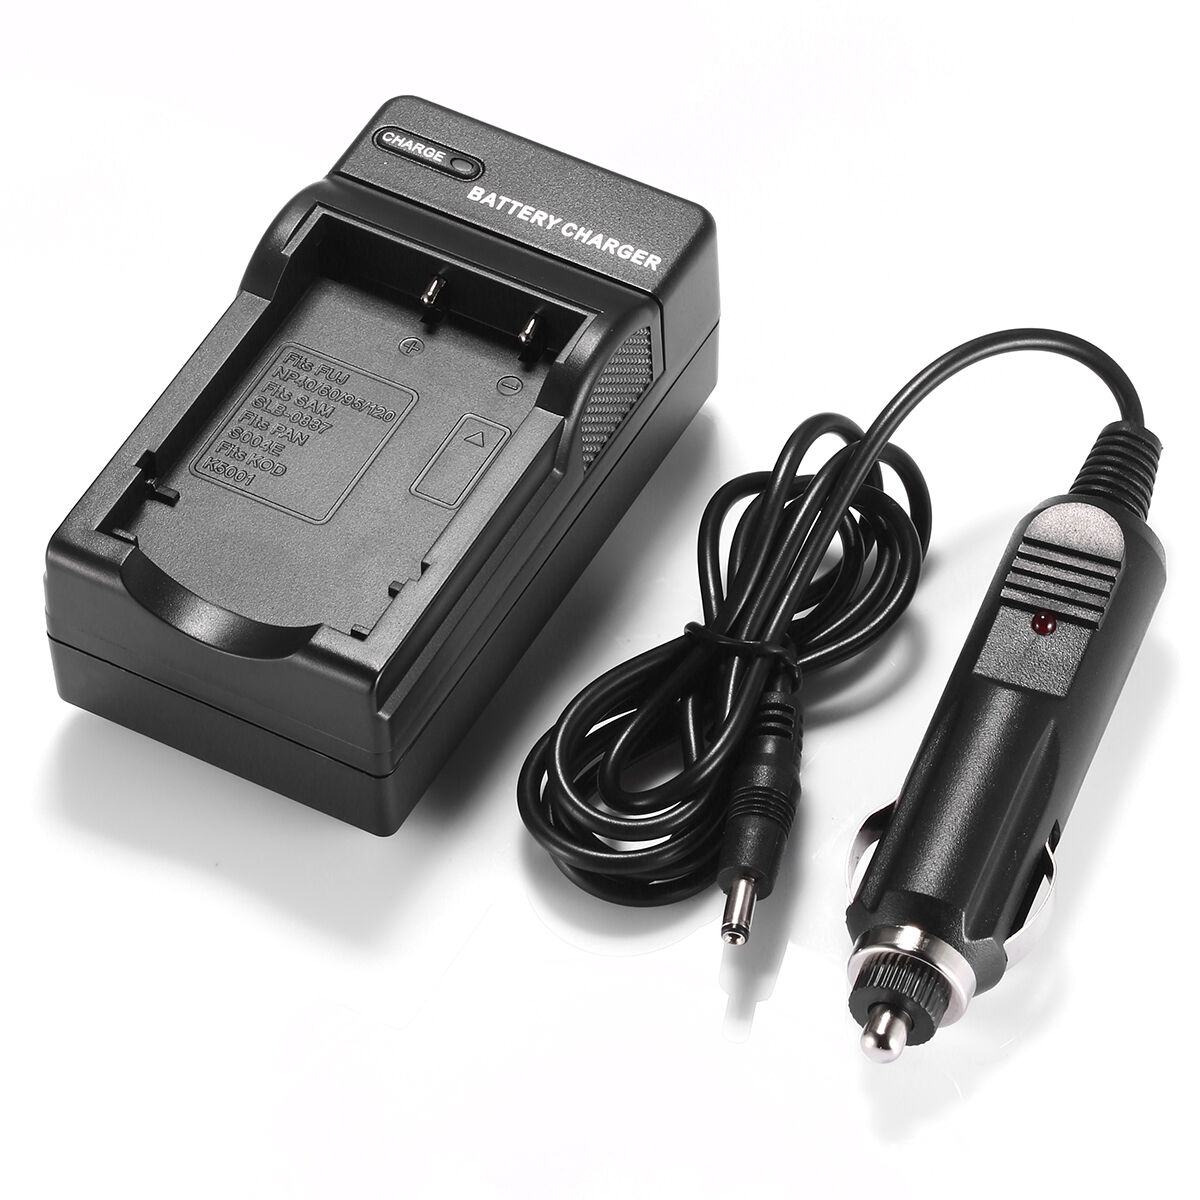 CASIO Exilim Zoom EX-Z2000RD battery charger